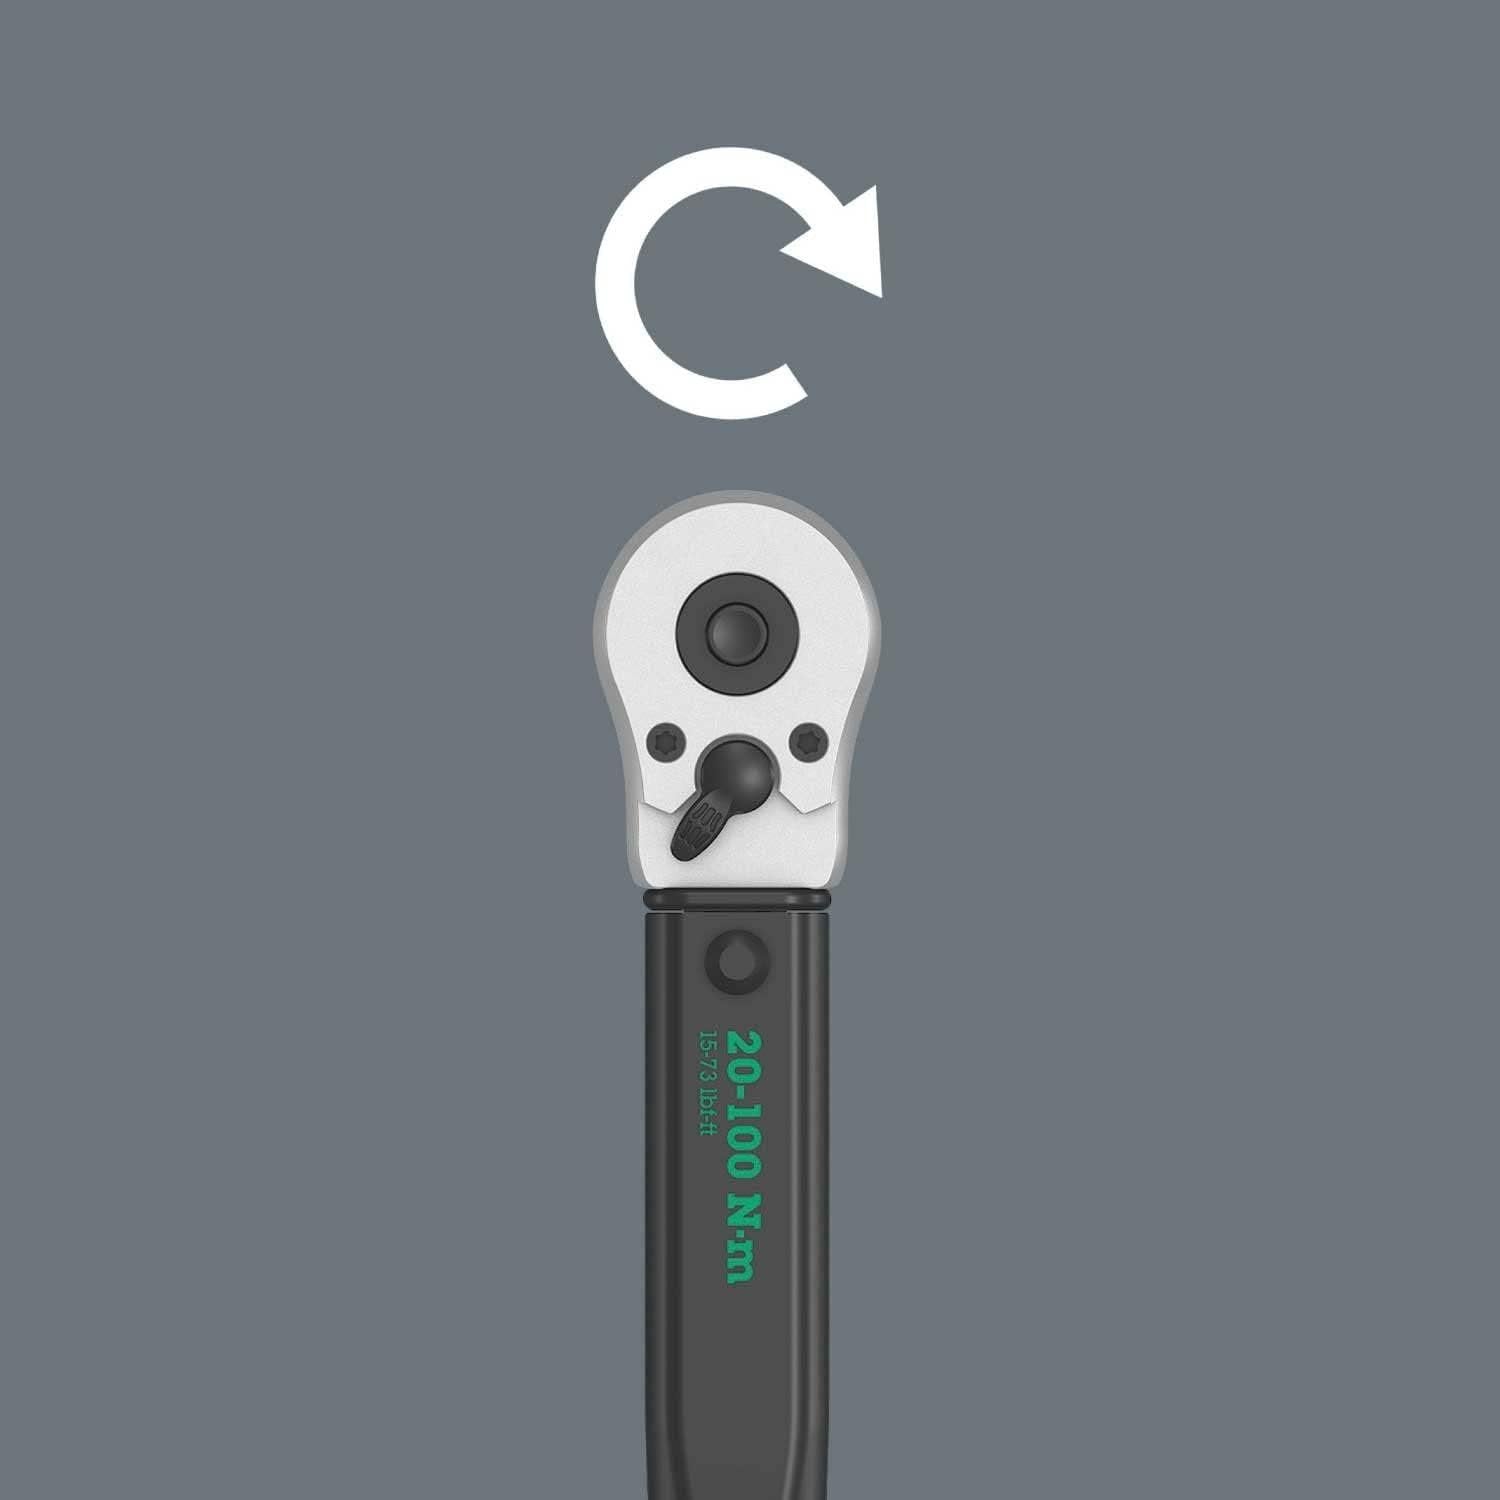 Wera WER-075611 Click-Torque B 2 torque wrench with reversible ratchet, 3/8"" x 20-100 Nm", black/green